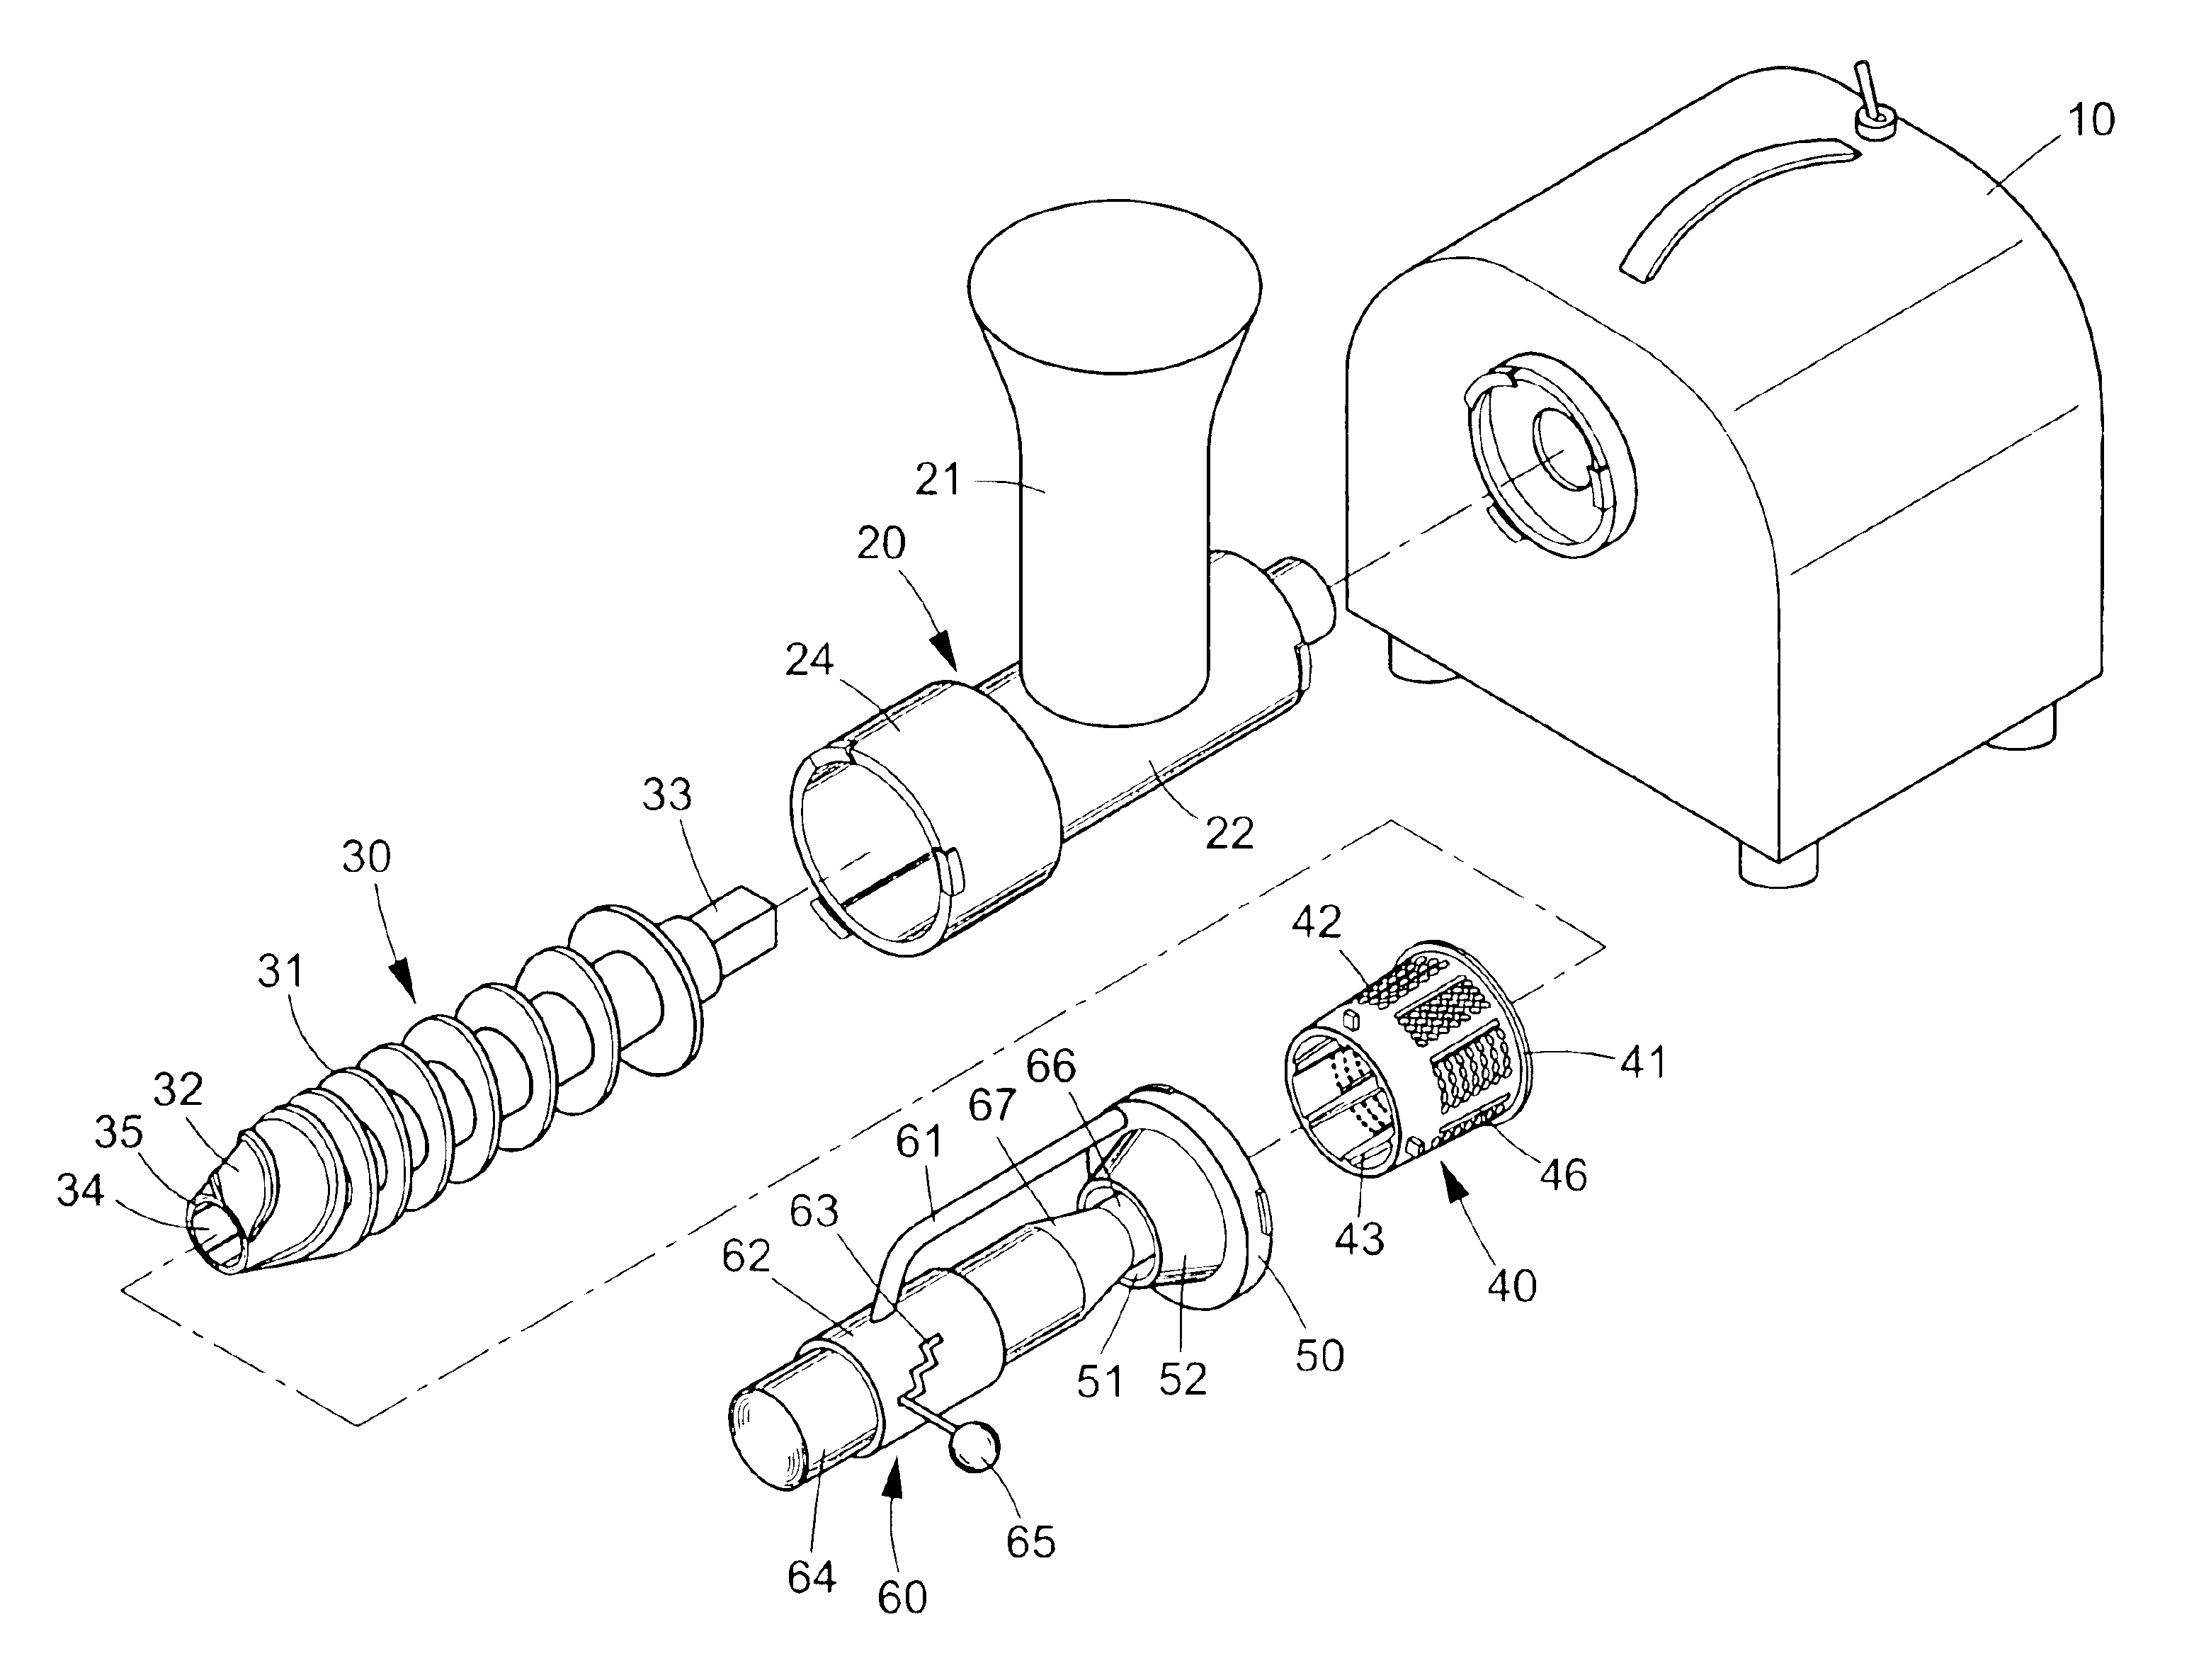 Device for extracting juice from plant